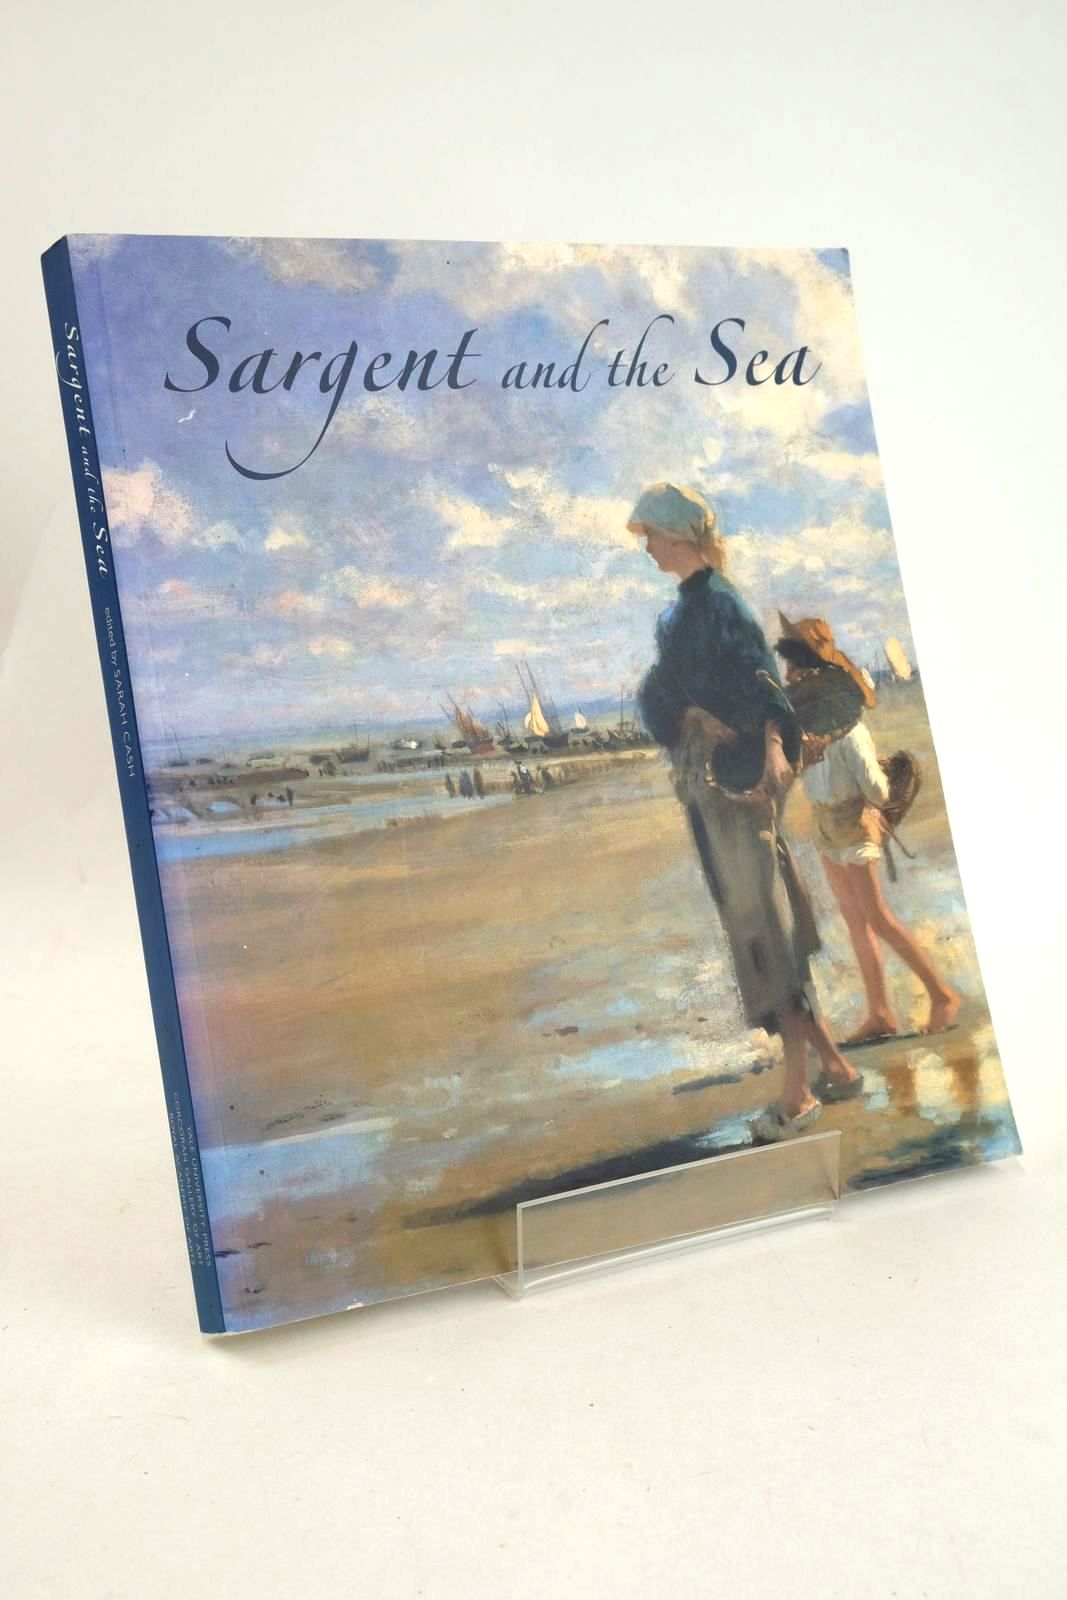 Photo of SARGENT AND THE SEA written by Cash, Sarah Herdrich, Stephanie L. Hirschler, Erica E. Ormond, Richard Simpson, Marc illustrated by Sargent, John Singer published by Yale University Press, Corcoran Gallery Of Art, Royal Academy of Arts (STOCK CODE: 1327959)  for sale by Stella & Rose's Books